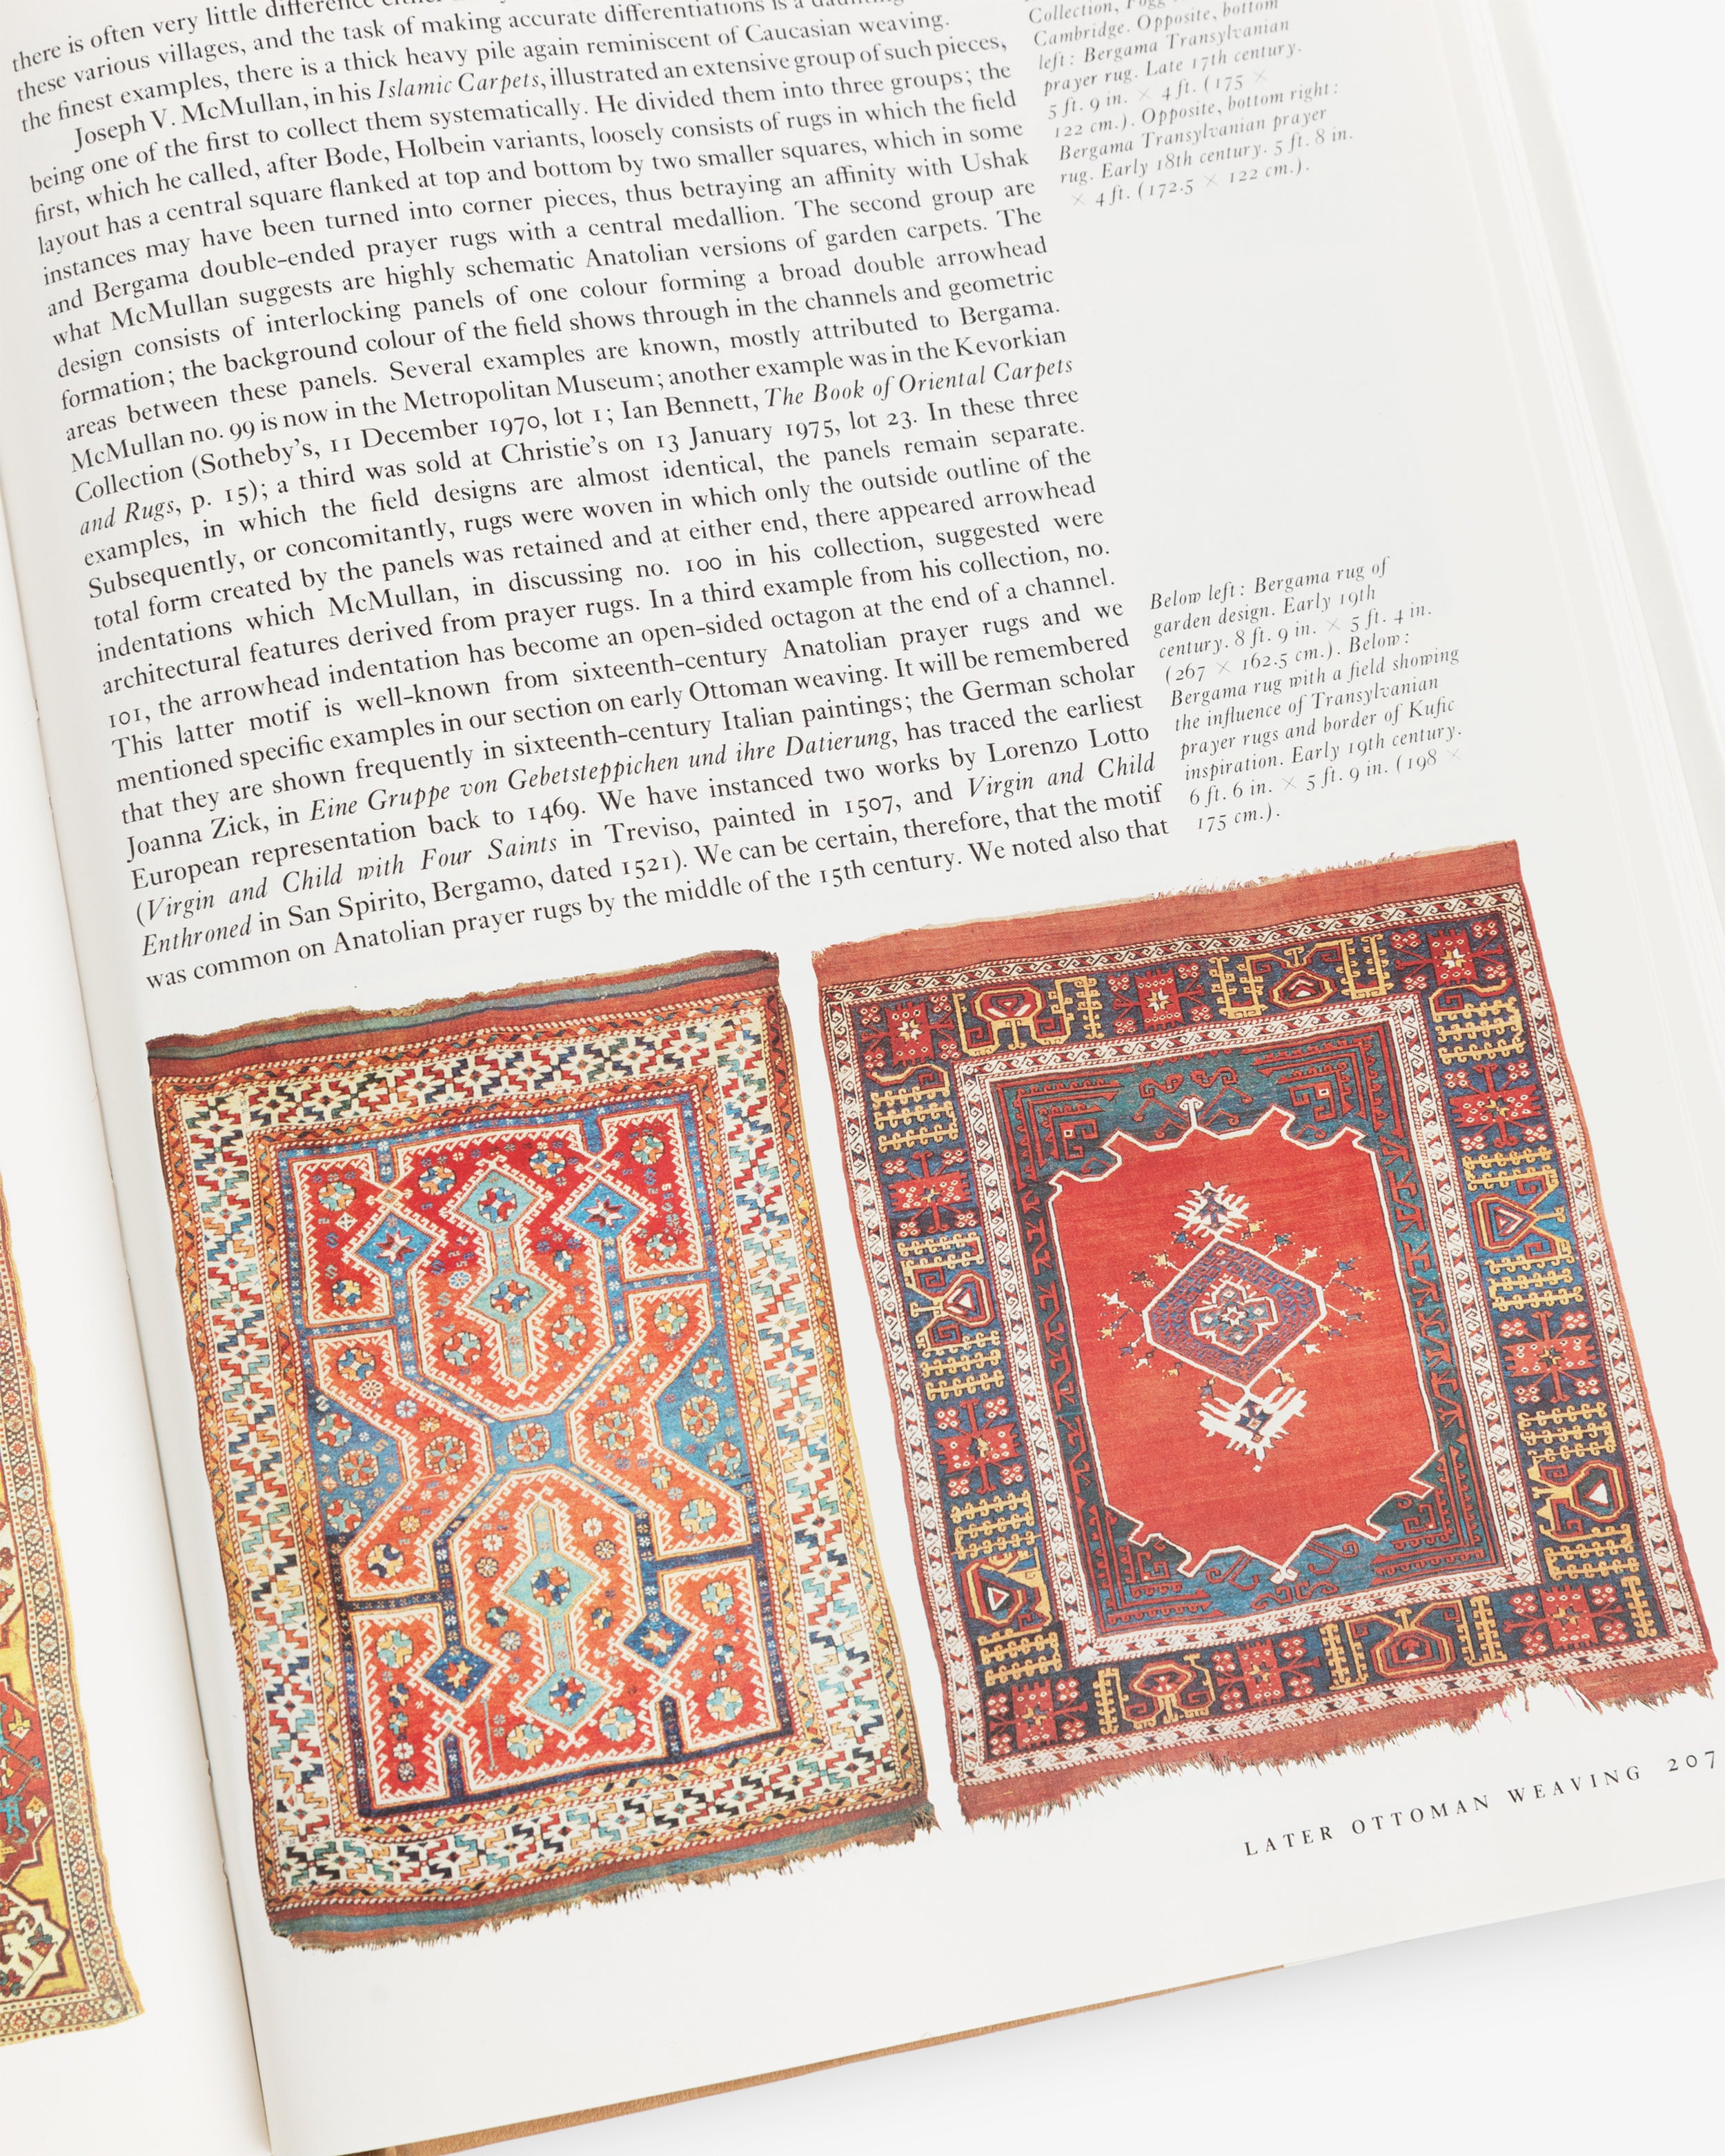 Complete Illustrated Rugs & Carpets of the World